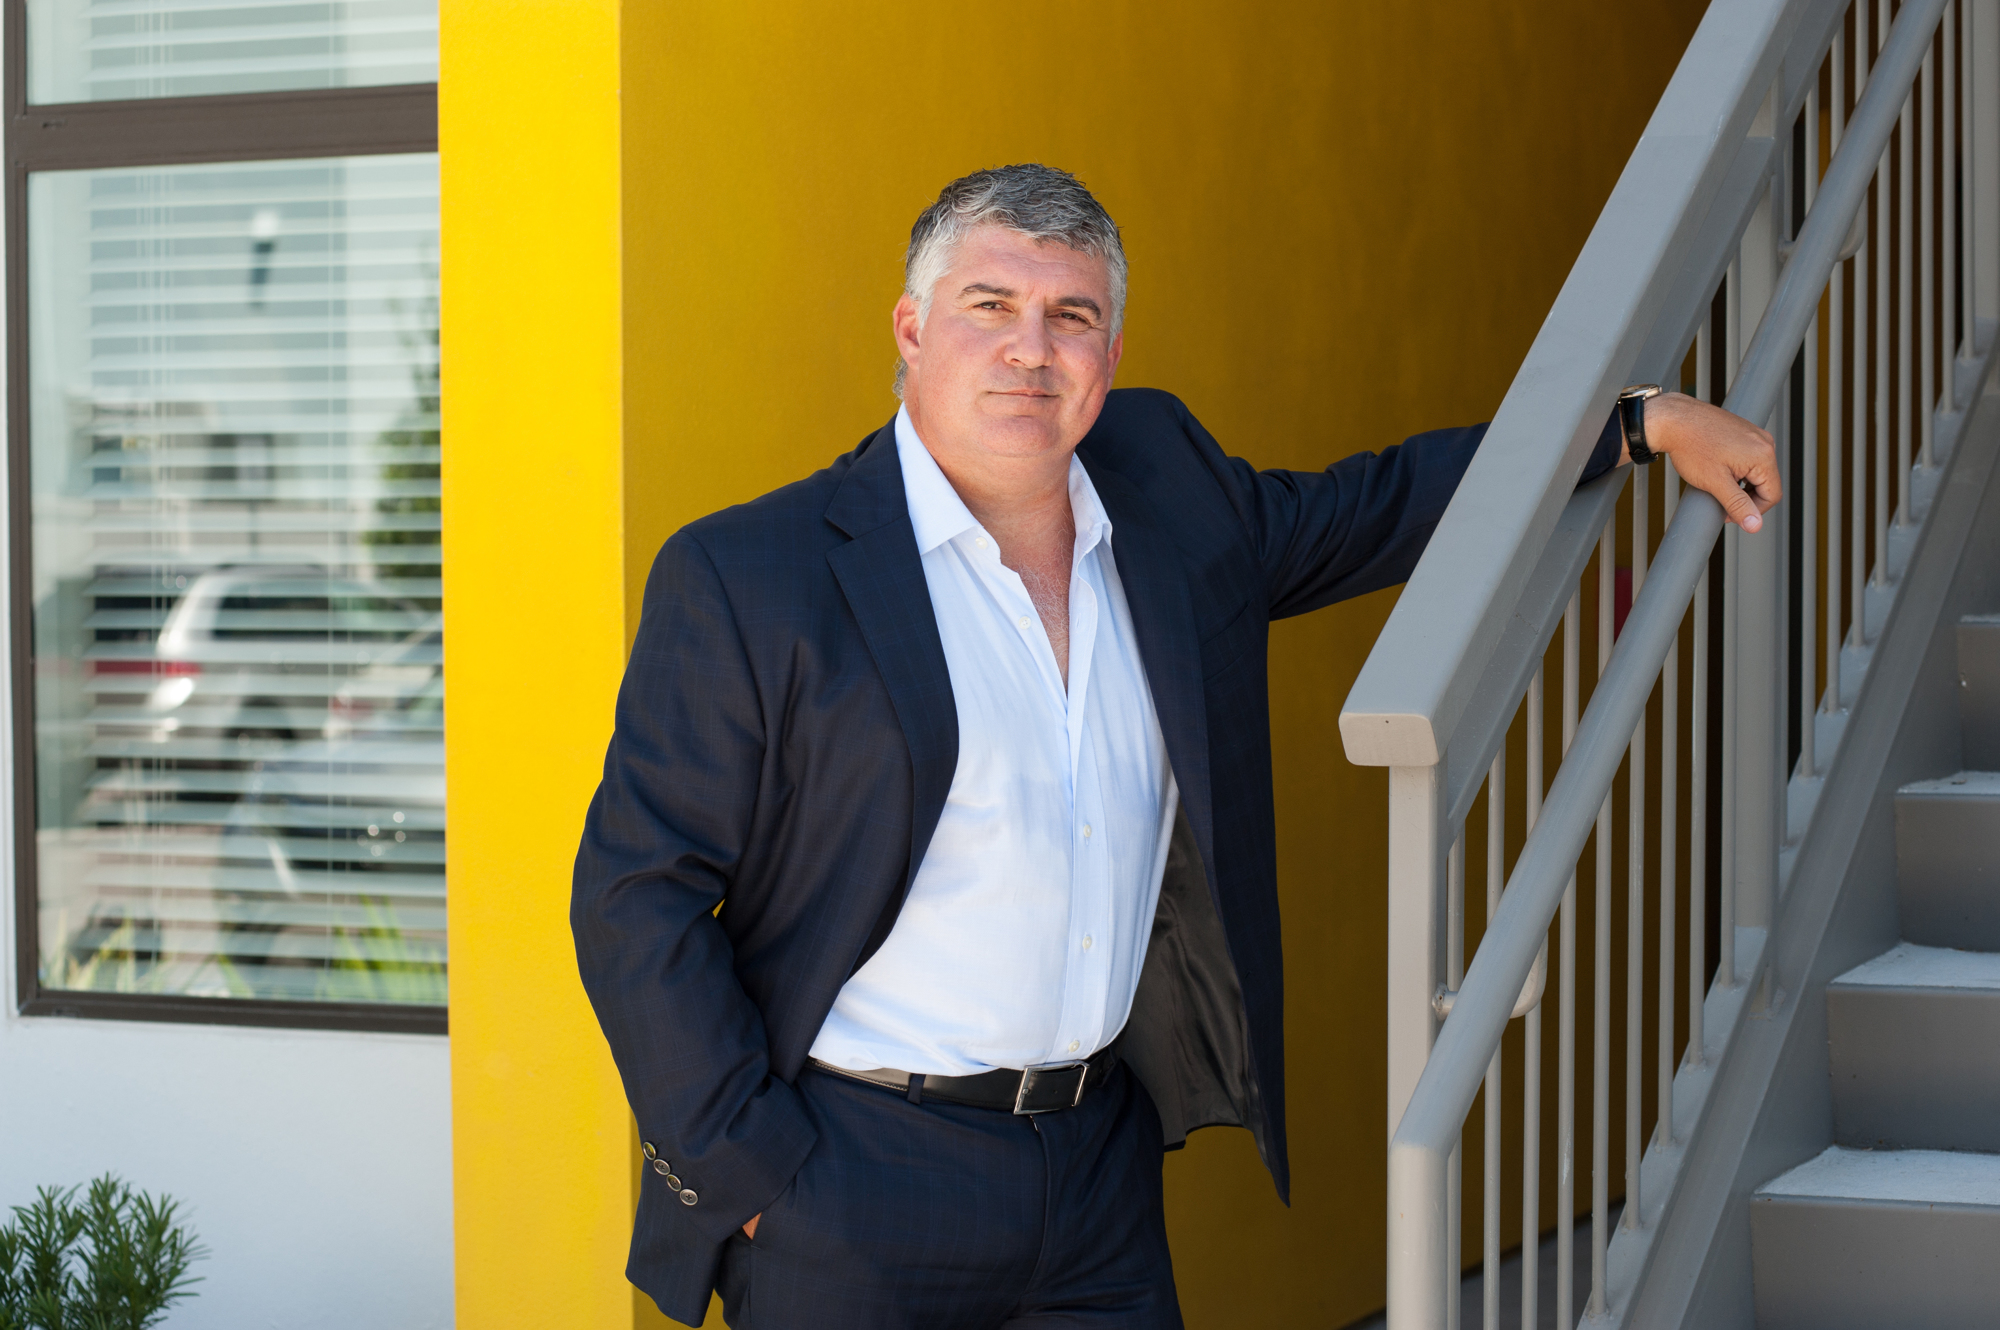 LORI SAX — Frank Guerra, founder and president of developer Altis Cardinal, was drawn to St. Petersburg because of its demographics and opportunities.